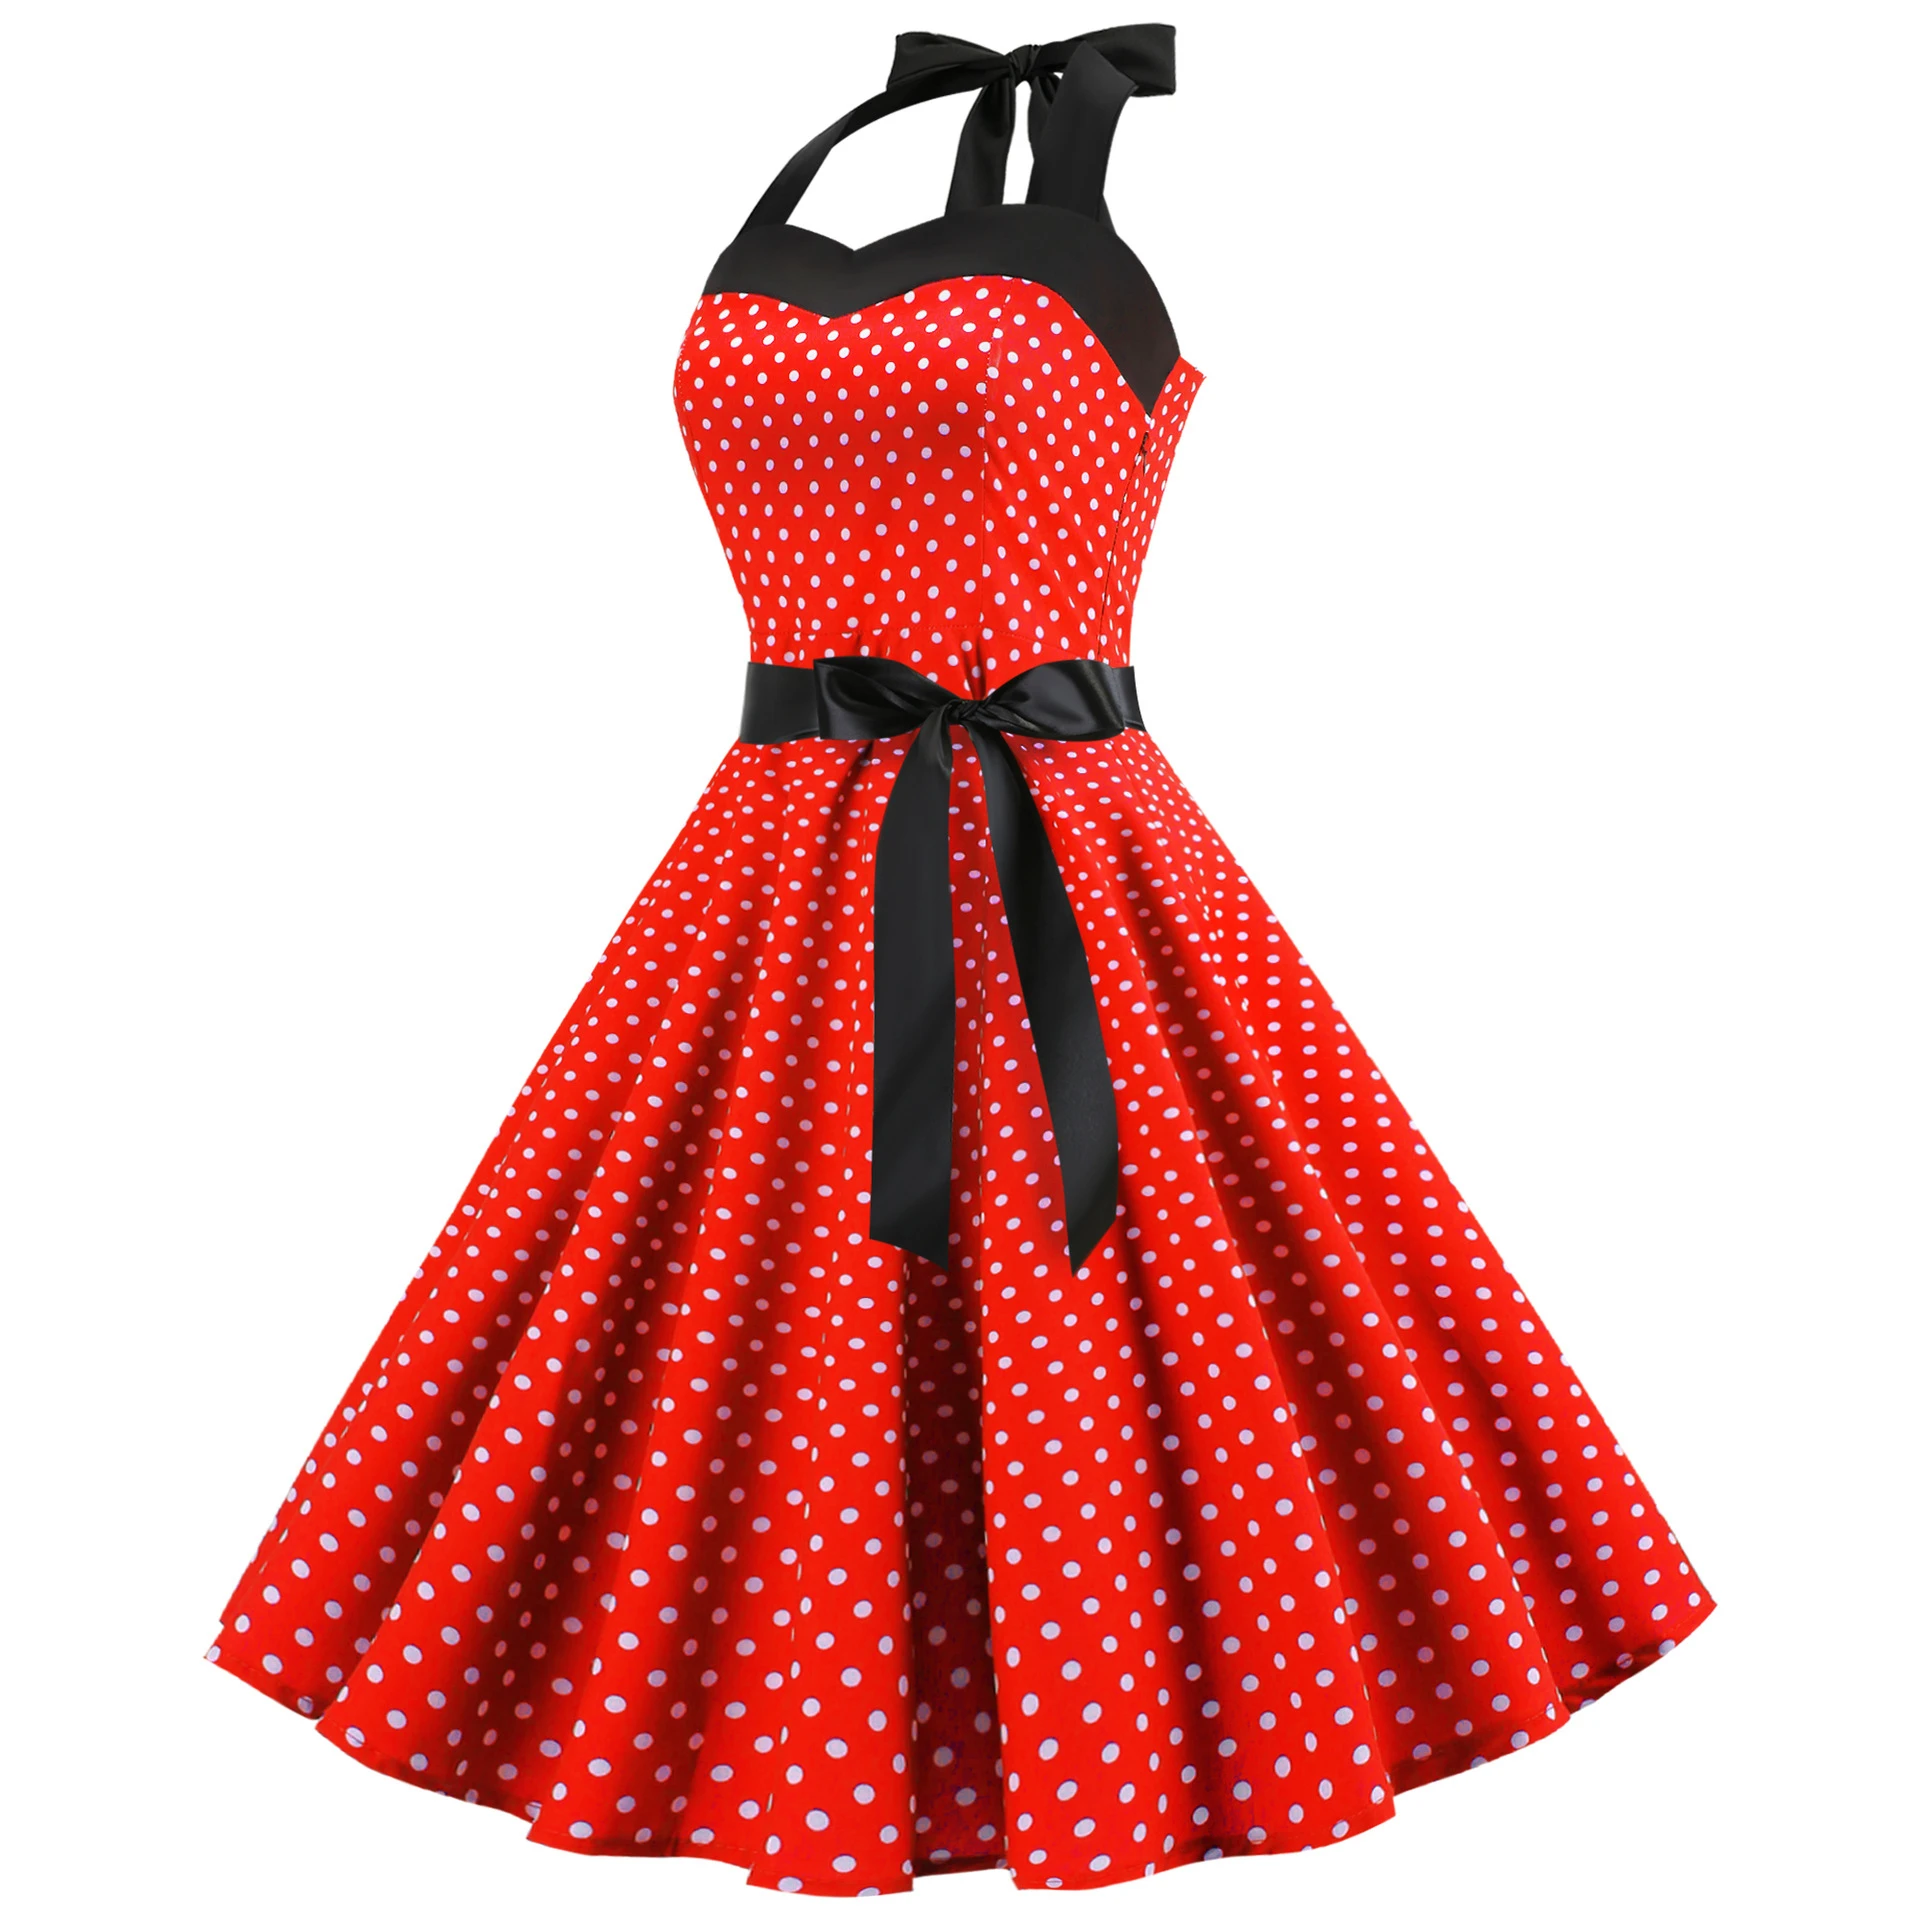 Maggie Tang 50s VTG Hepburn Rockabilly Pinup Party Swing Business Dress R-570 